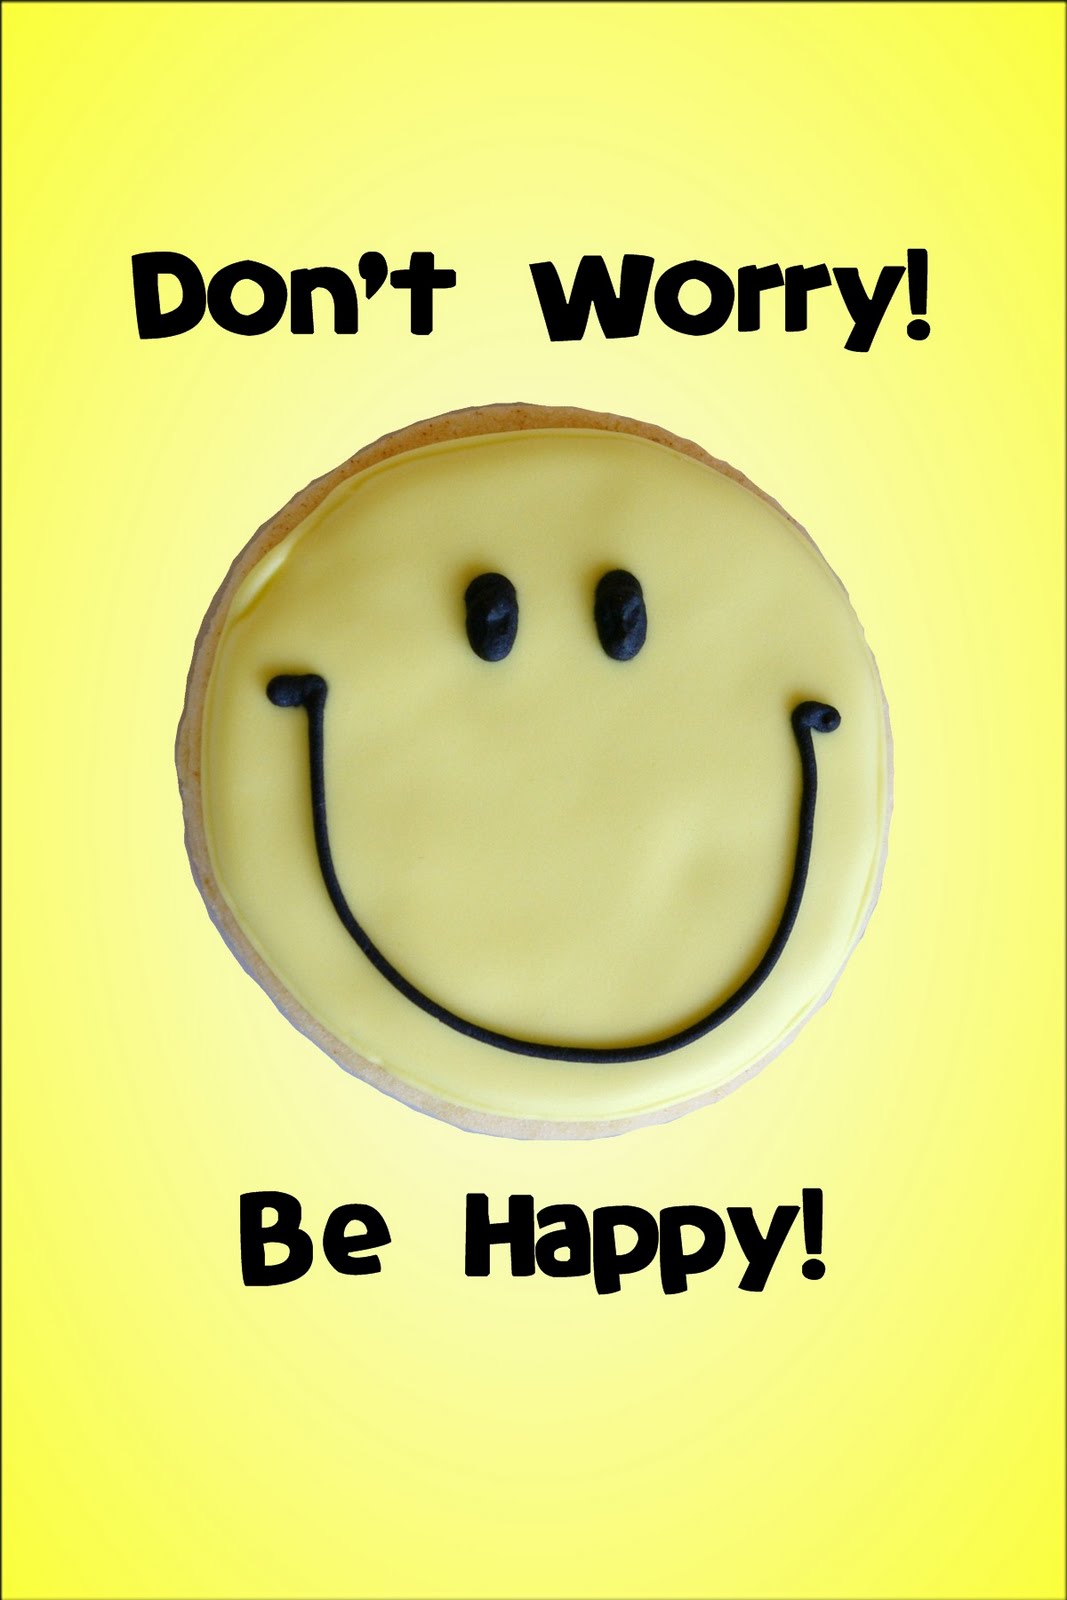 Don worry be happy на русском. Don't worry be Happy. Don't worry be Happy картинки. Донт вори би Хэппи. Don't worry be Happy обои.